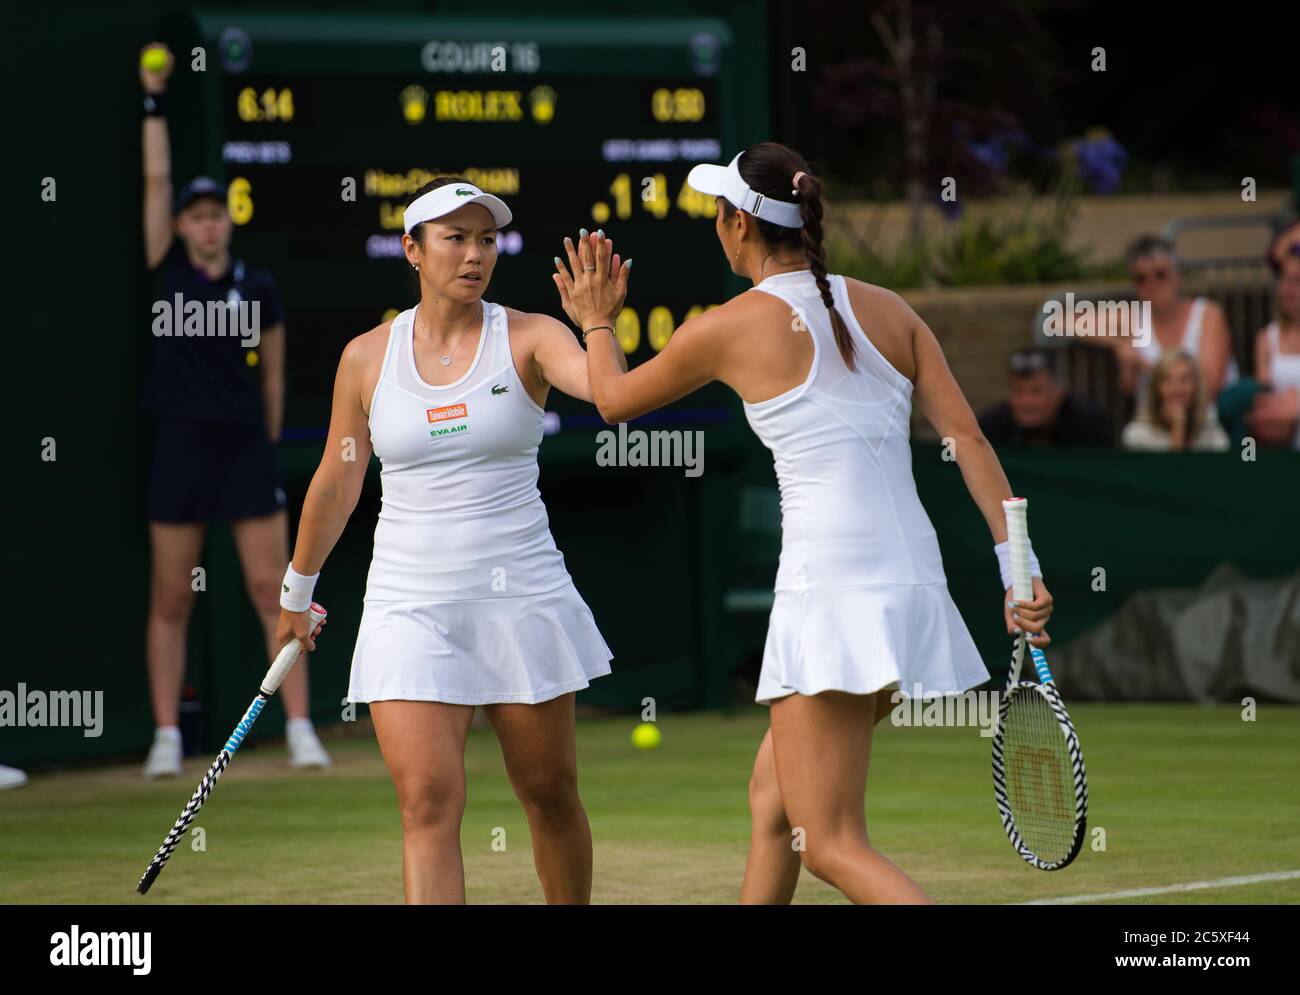 Latisha Chan & Hao-Ching Chan of Chinese Taipeh playing doubles at the 2019 Wimbledon Championships Grand Slam Tennis Tournament Stock Photo